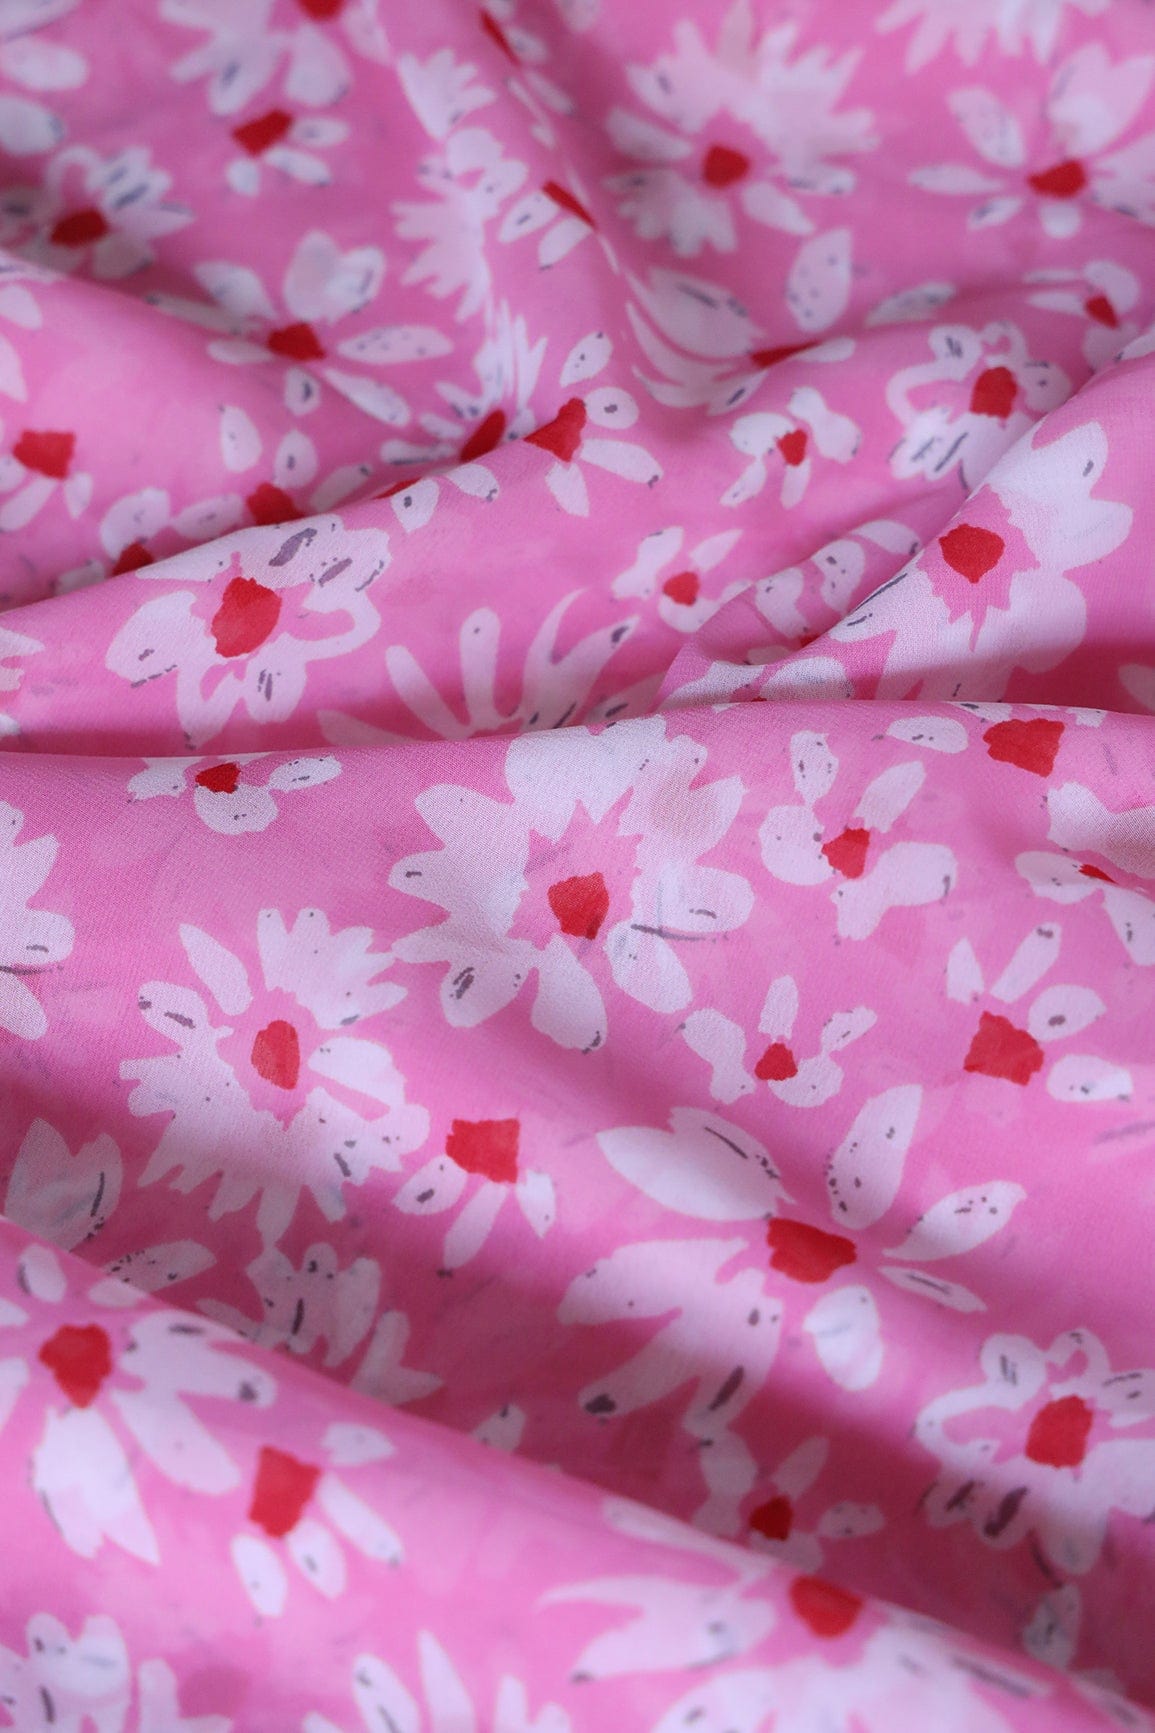 Big Width "56" White And Red Floral Digital Print On Pink Georgette Fabric - doeraa